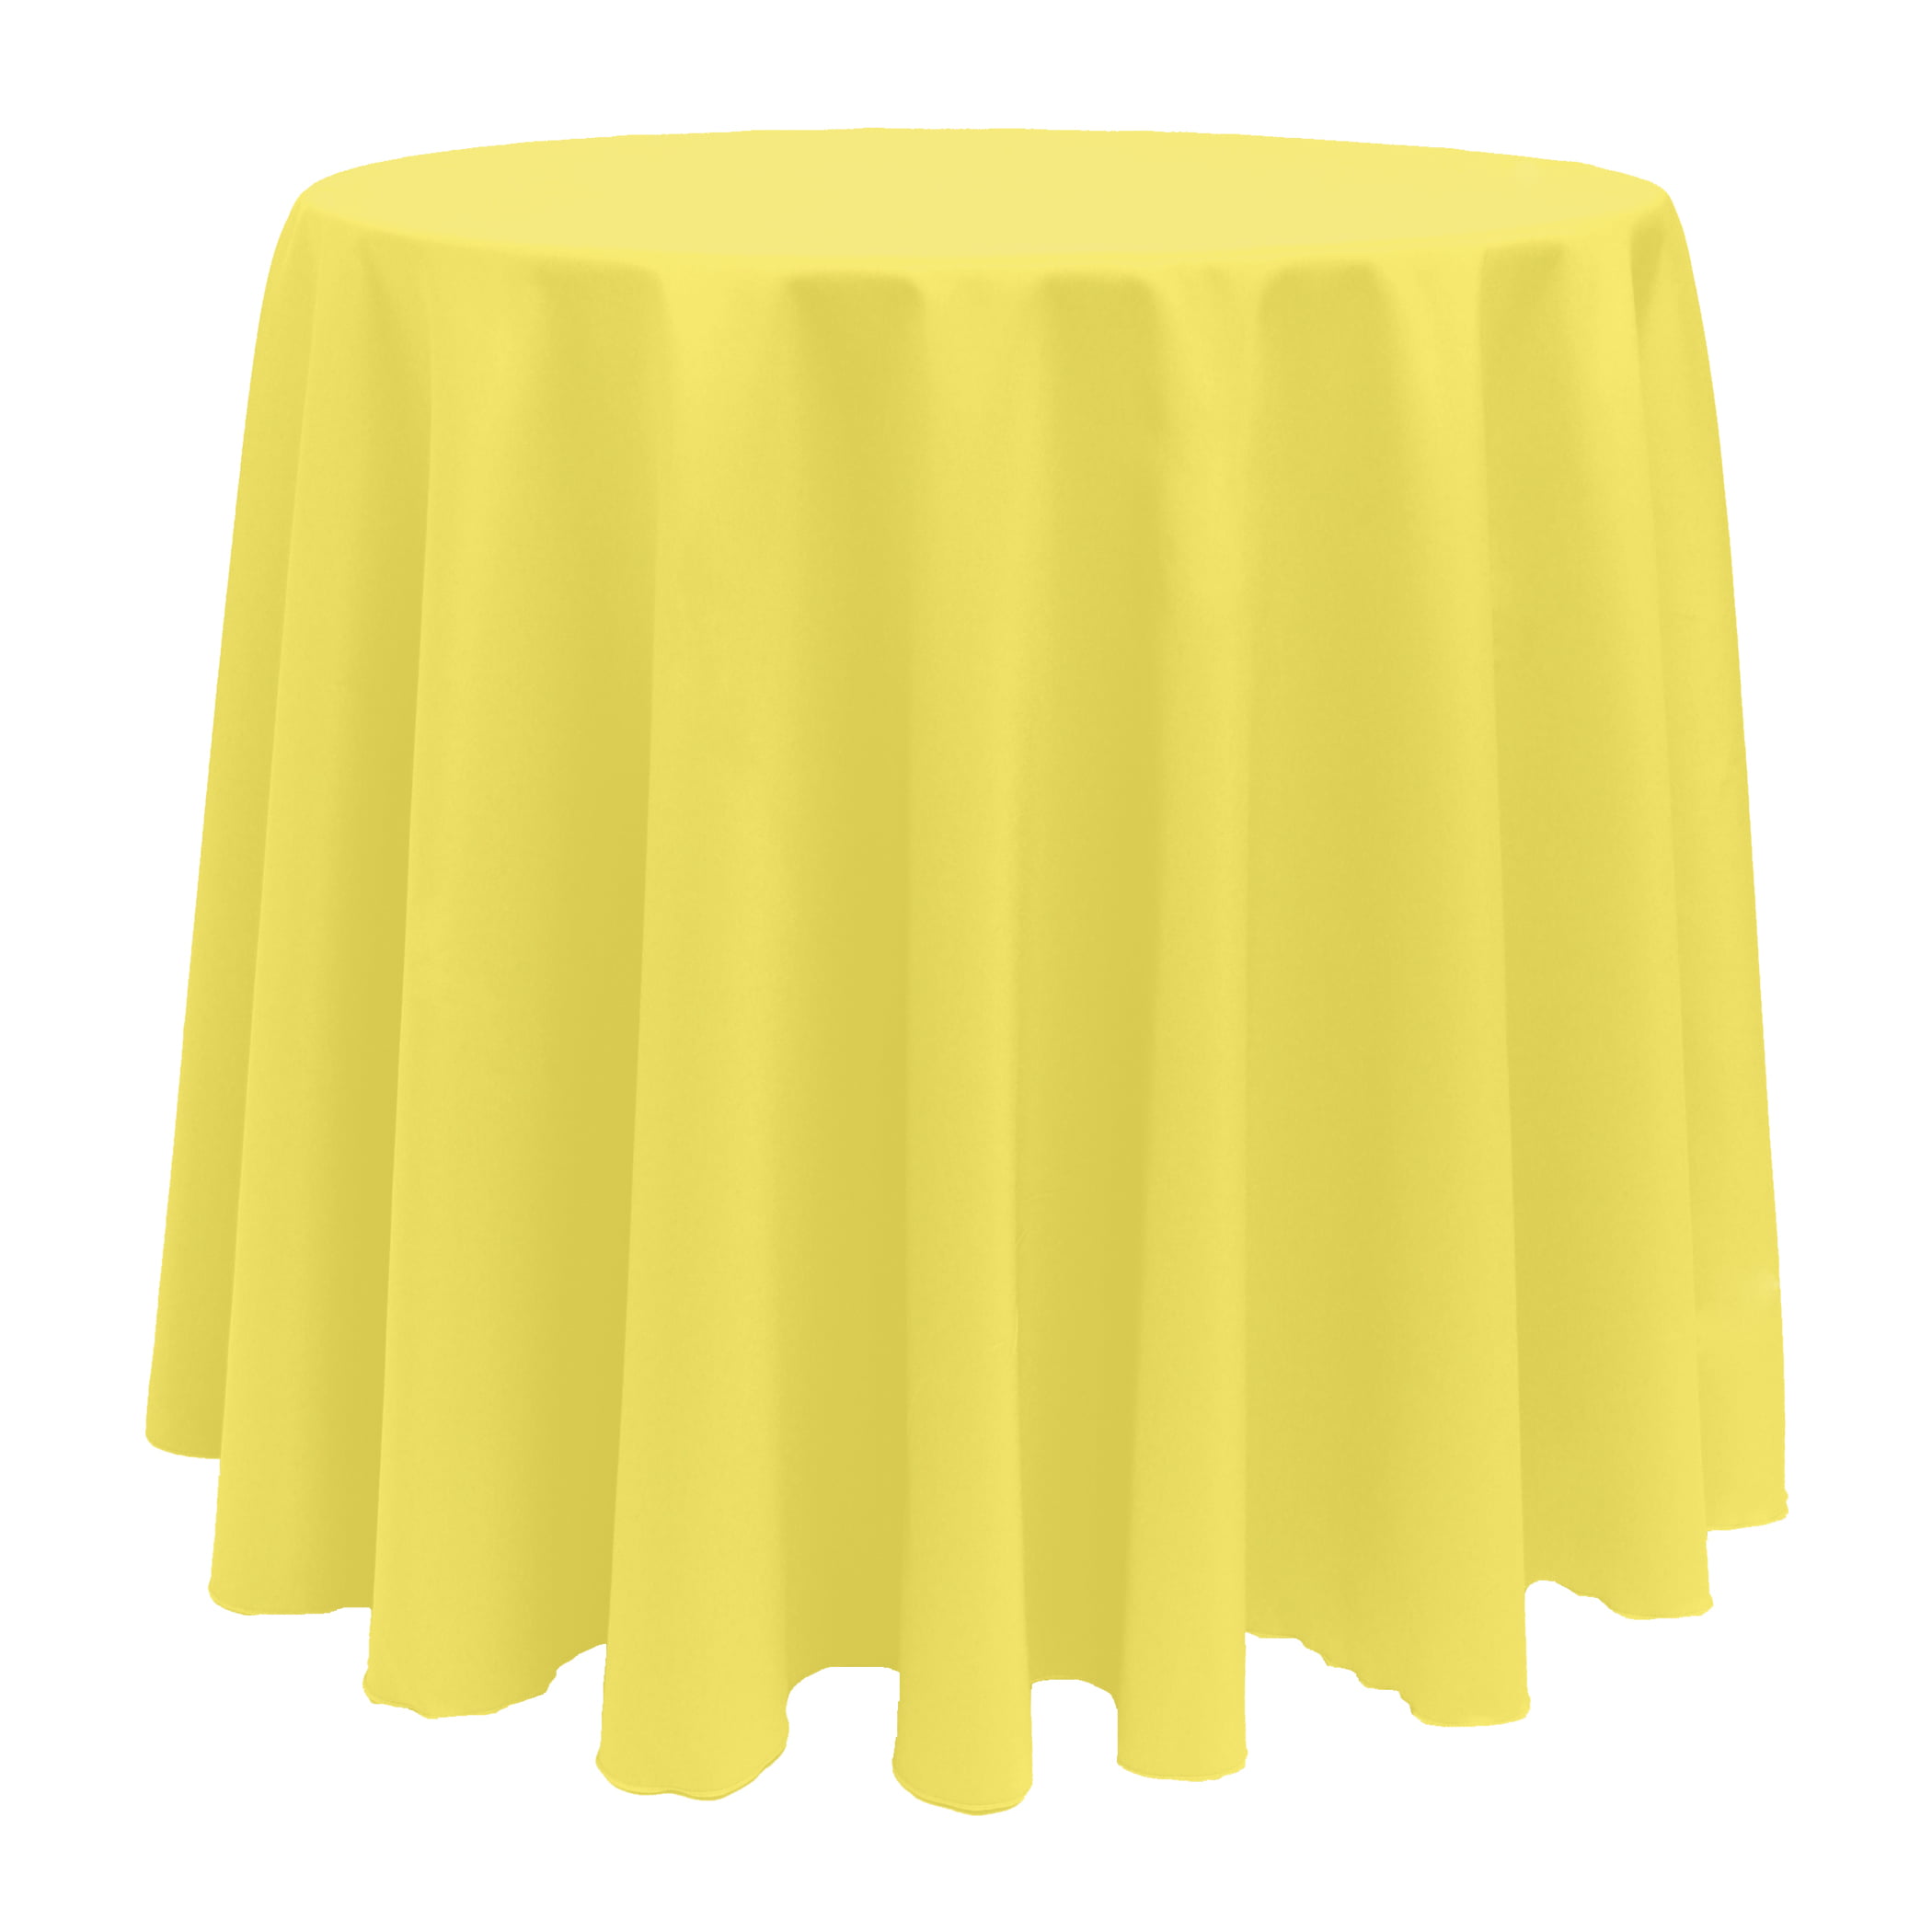 Poly Round Seamless Tablecloth Wedding Party Banquet Restaurant 5 Pk 132 in 